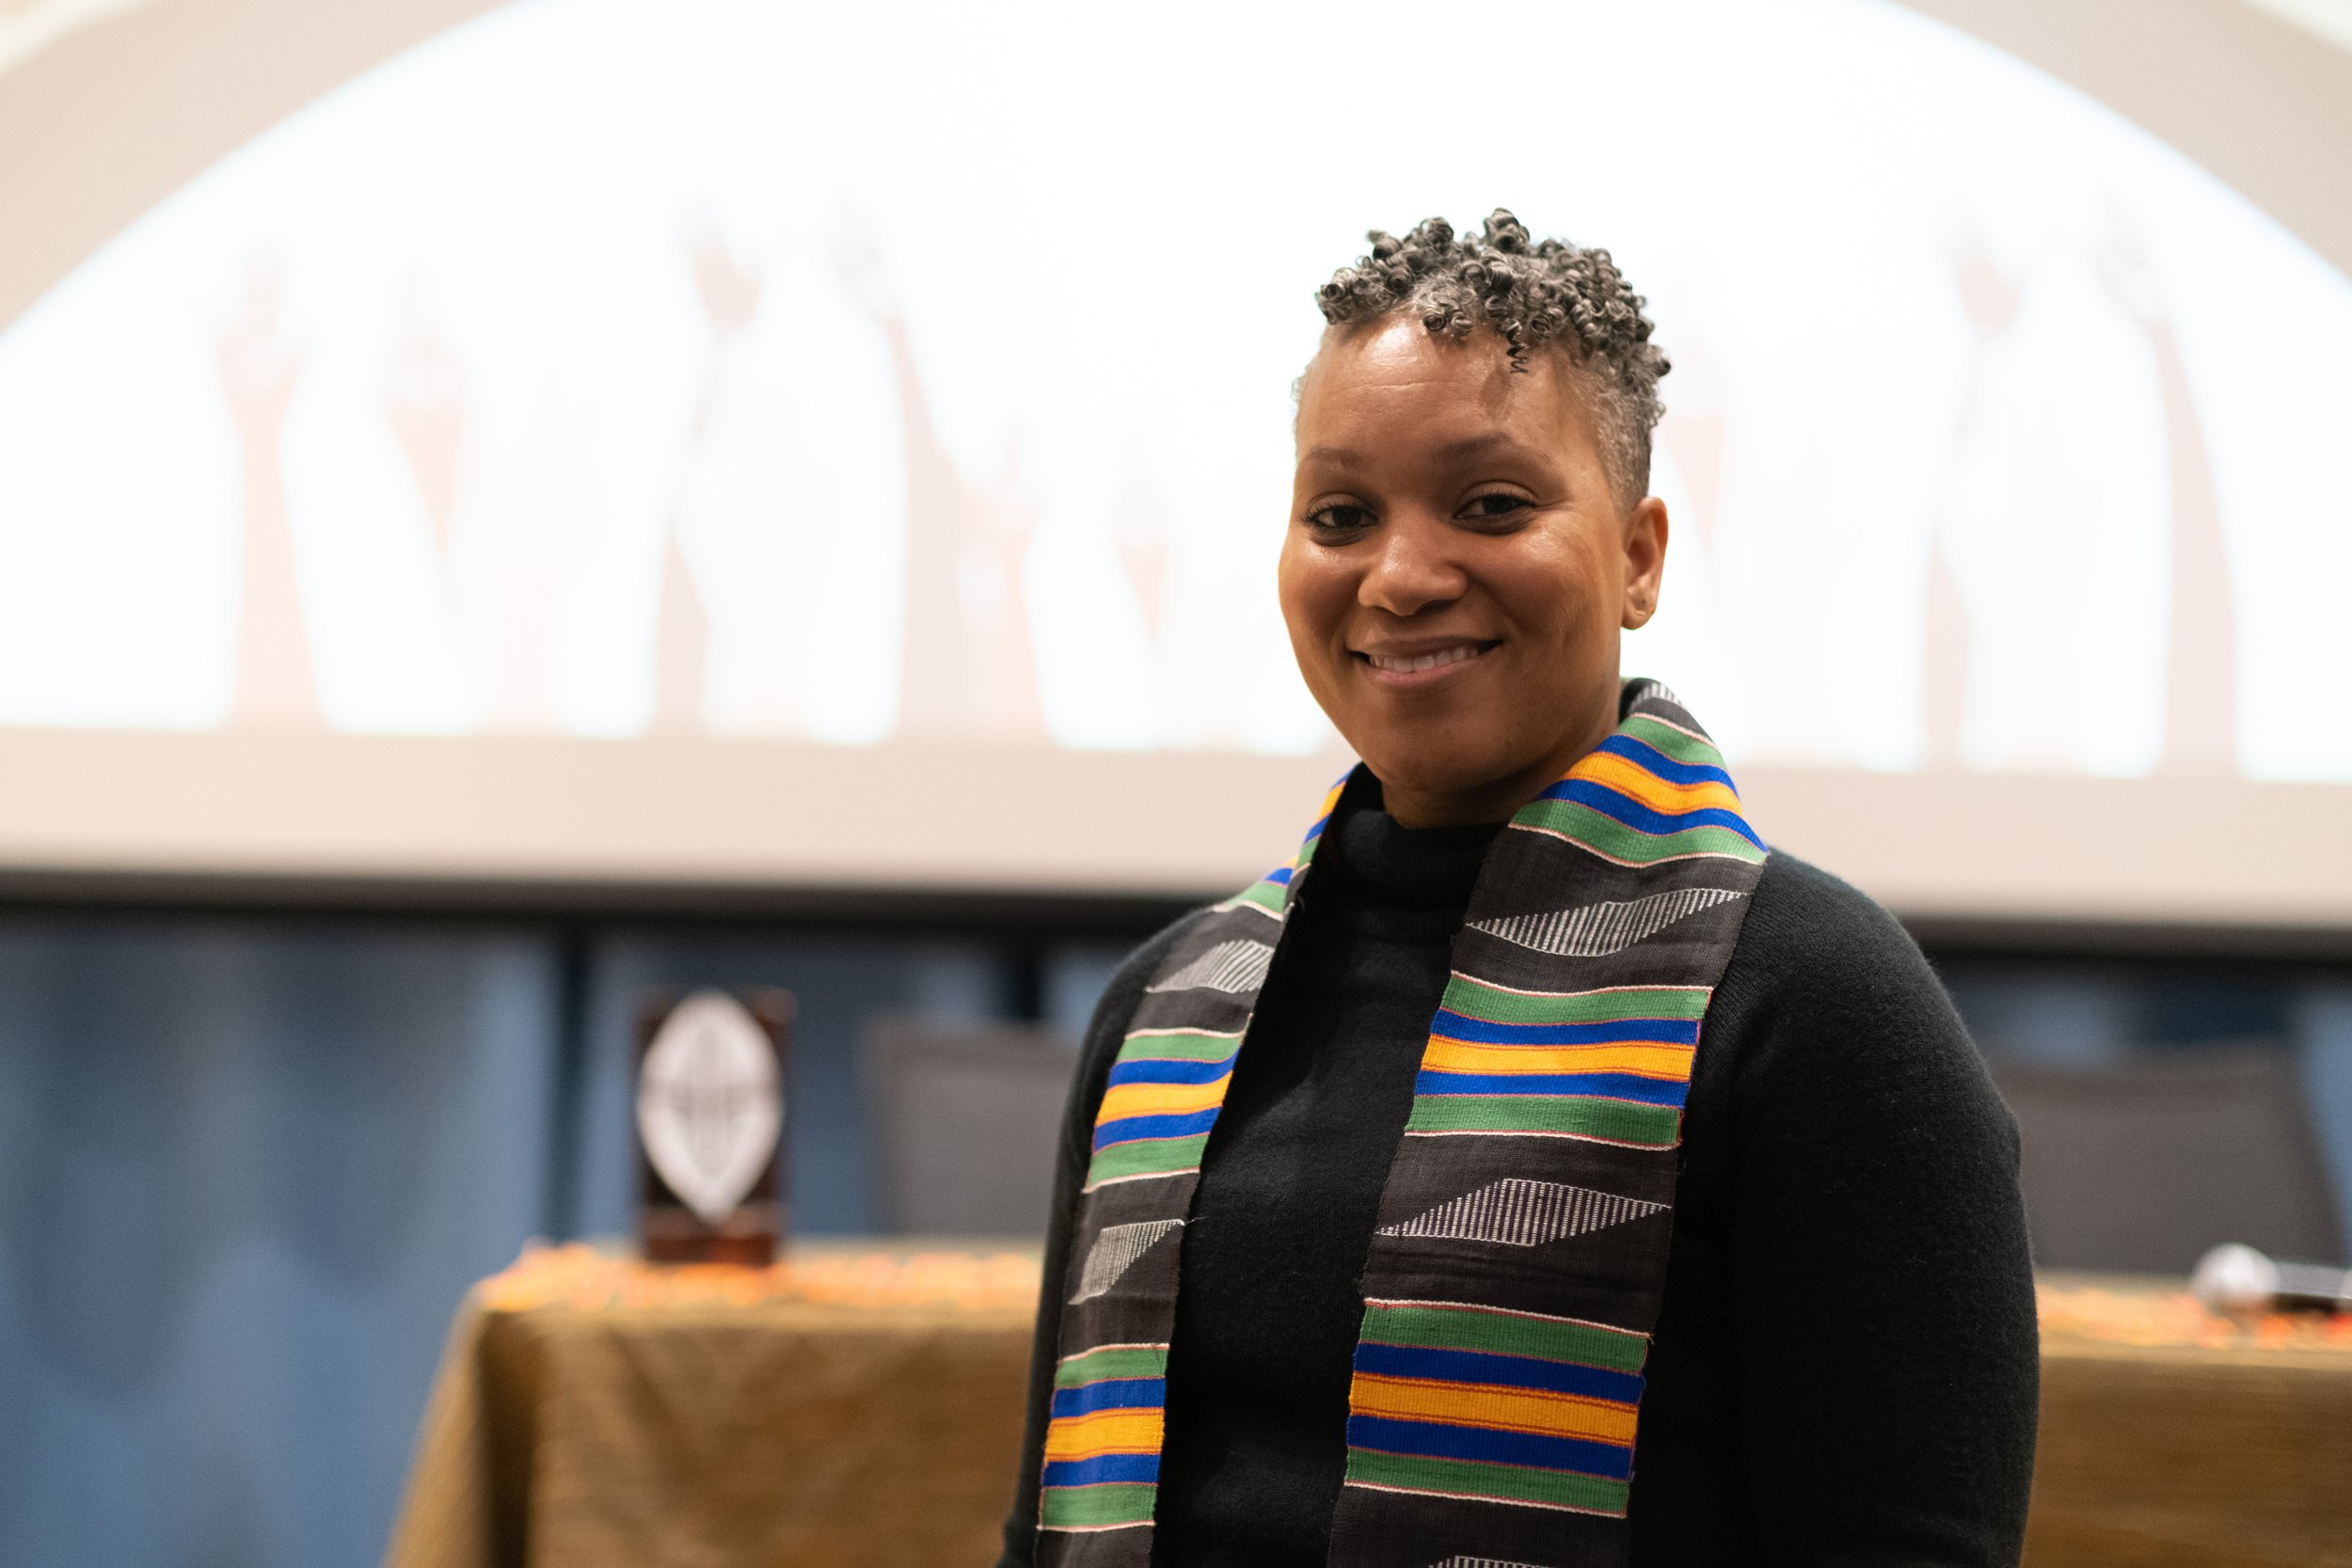  Secretary Treasurer Jocelynn Wynn, at the Orientation Hall in Santa Monica College's (SMC) Student Services Center, ready for the Pan African Alliance's Black History Month celebration on Friday, February 24, 2023 to begin. (Akemi Rico | The Corsair